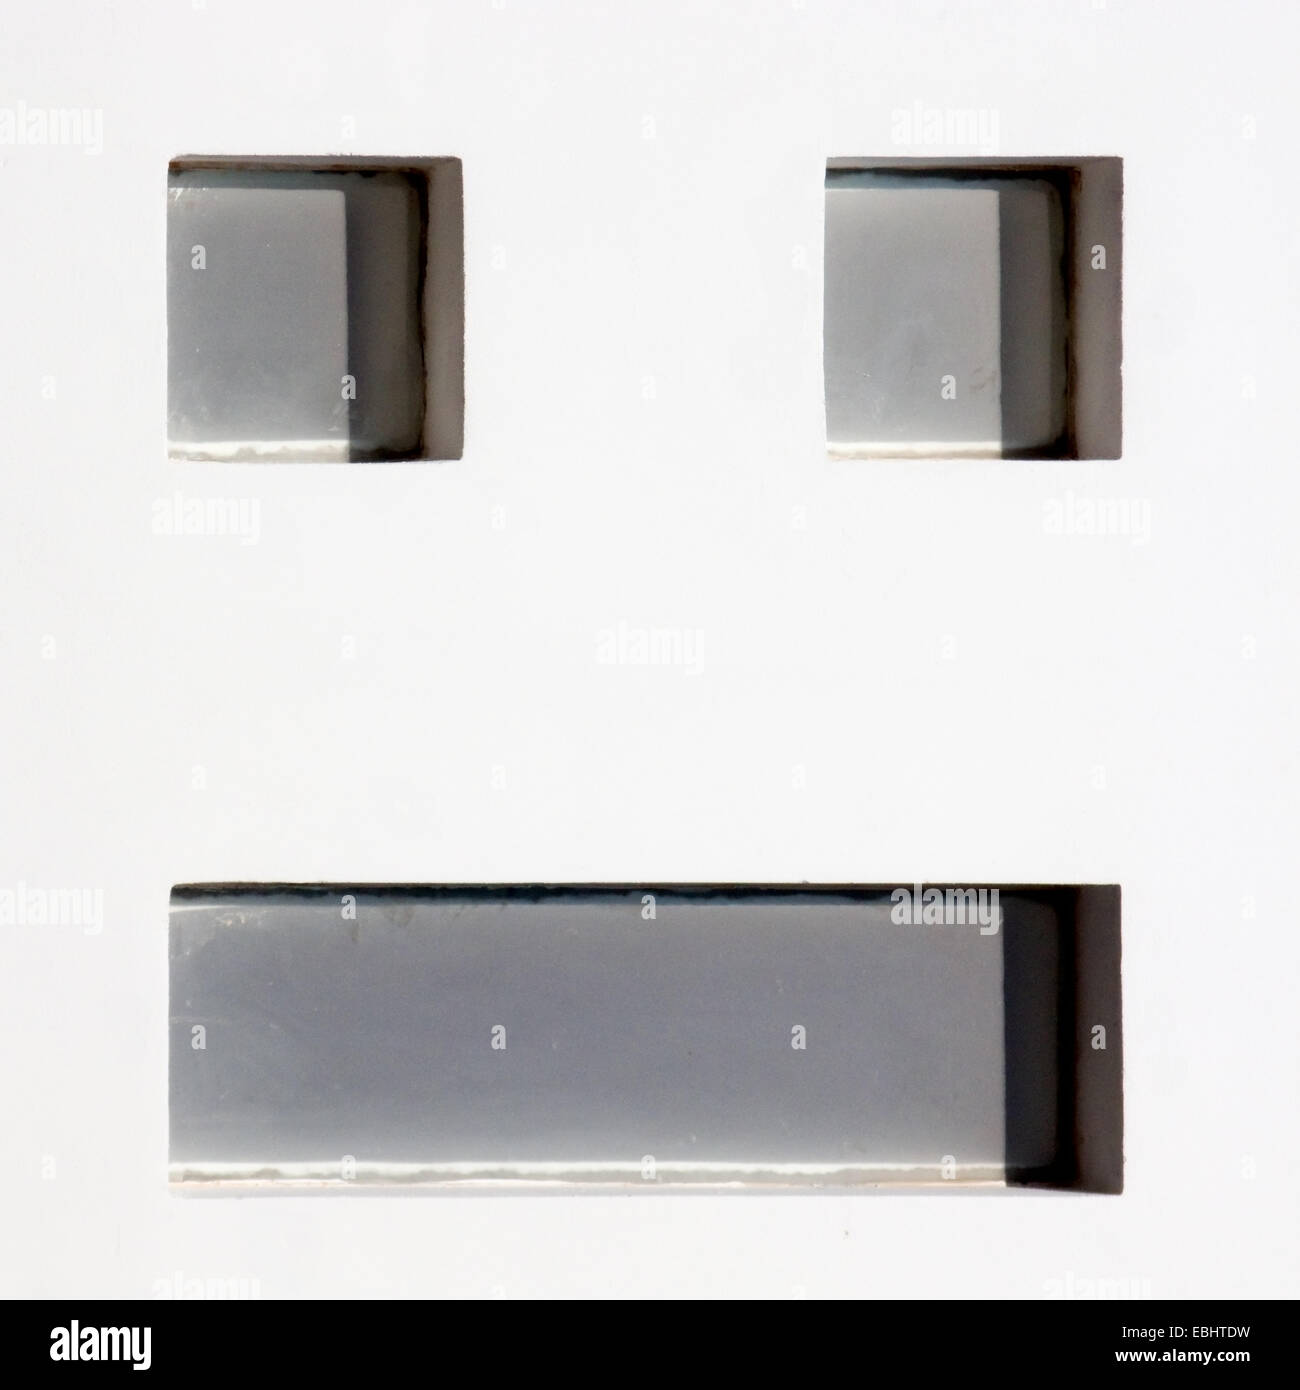 Smiley windows. Windows on a wall looking like a smiley. Stock Photo